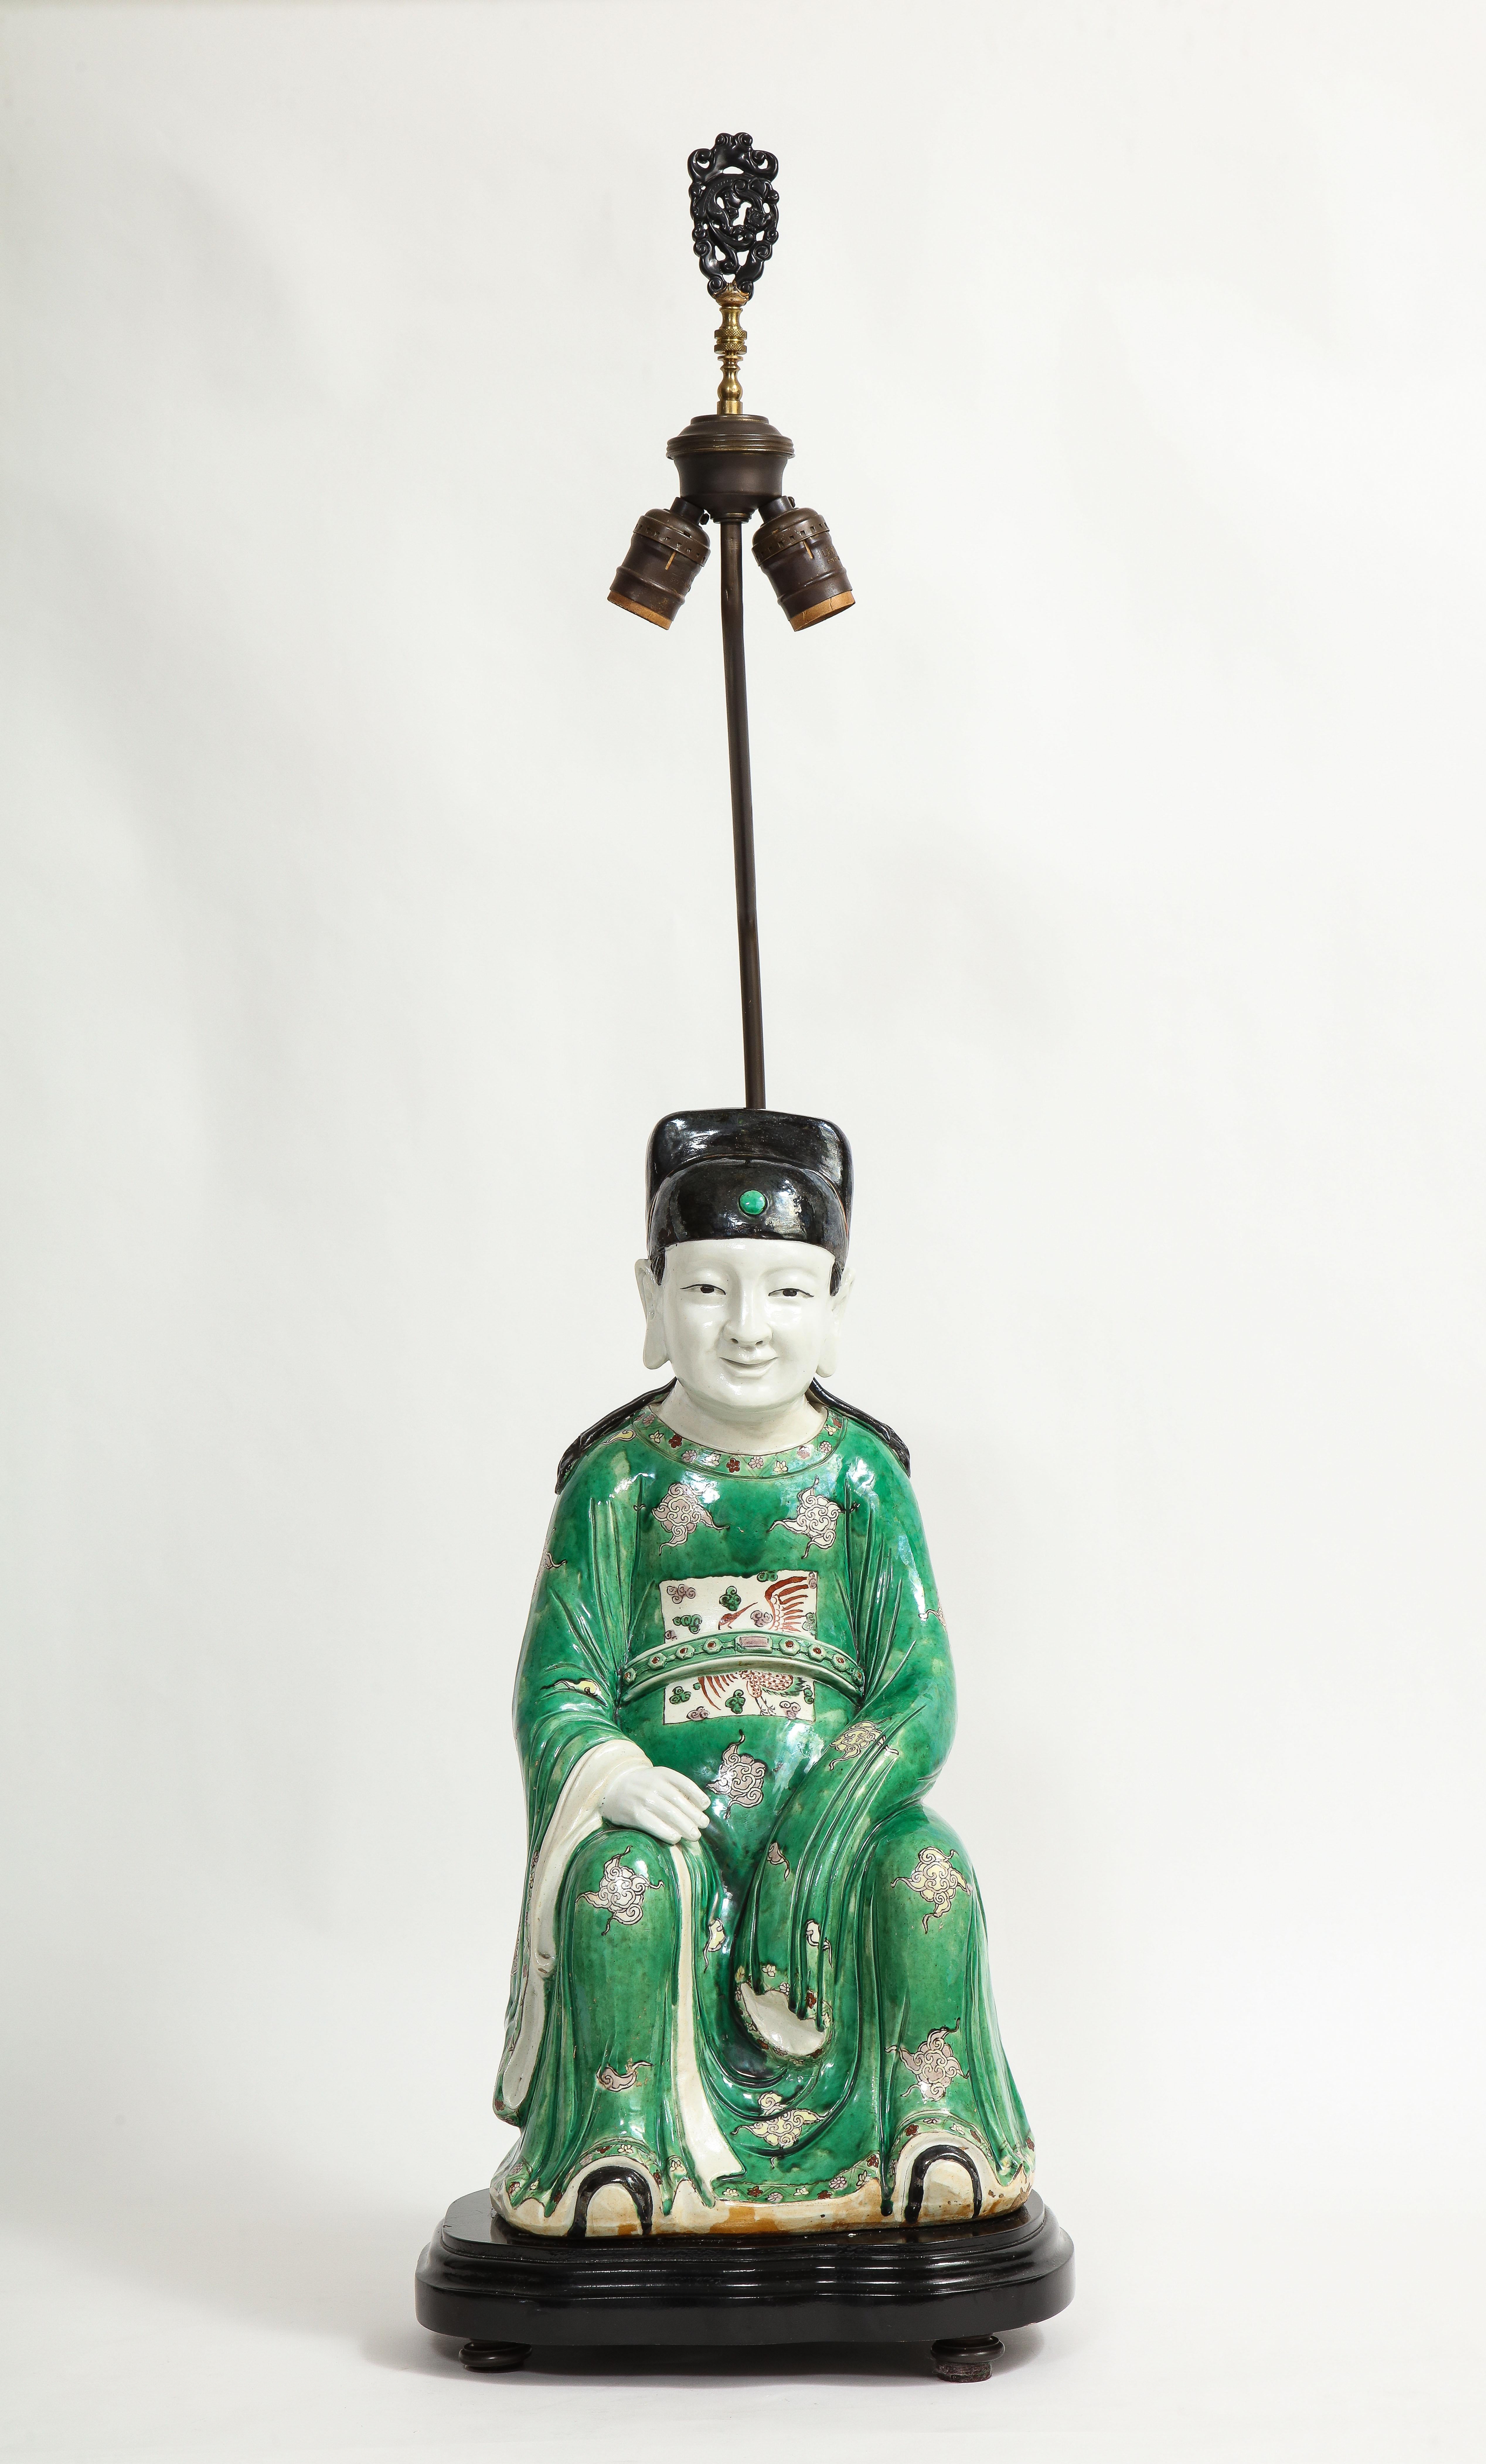 A fabulous 19th century Chinese Famille Vert Porcelain figure of a seated scholar mounted as a lamp. Beautifully hand-painted with an array of monochromatic colors including green, black, red, yellow, and white. The scholar is seen seated with a